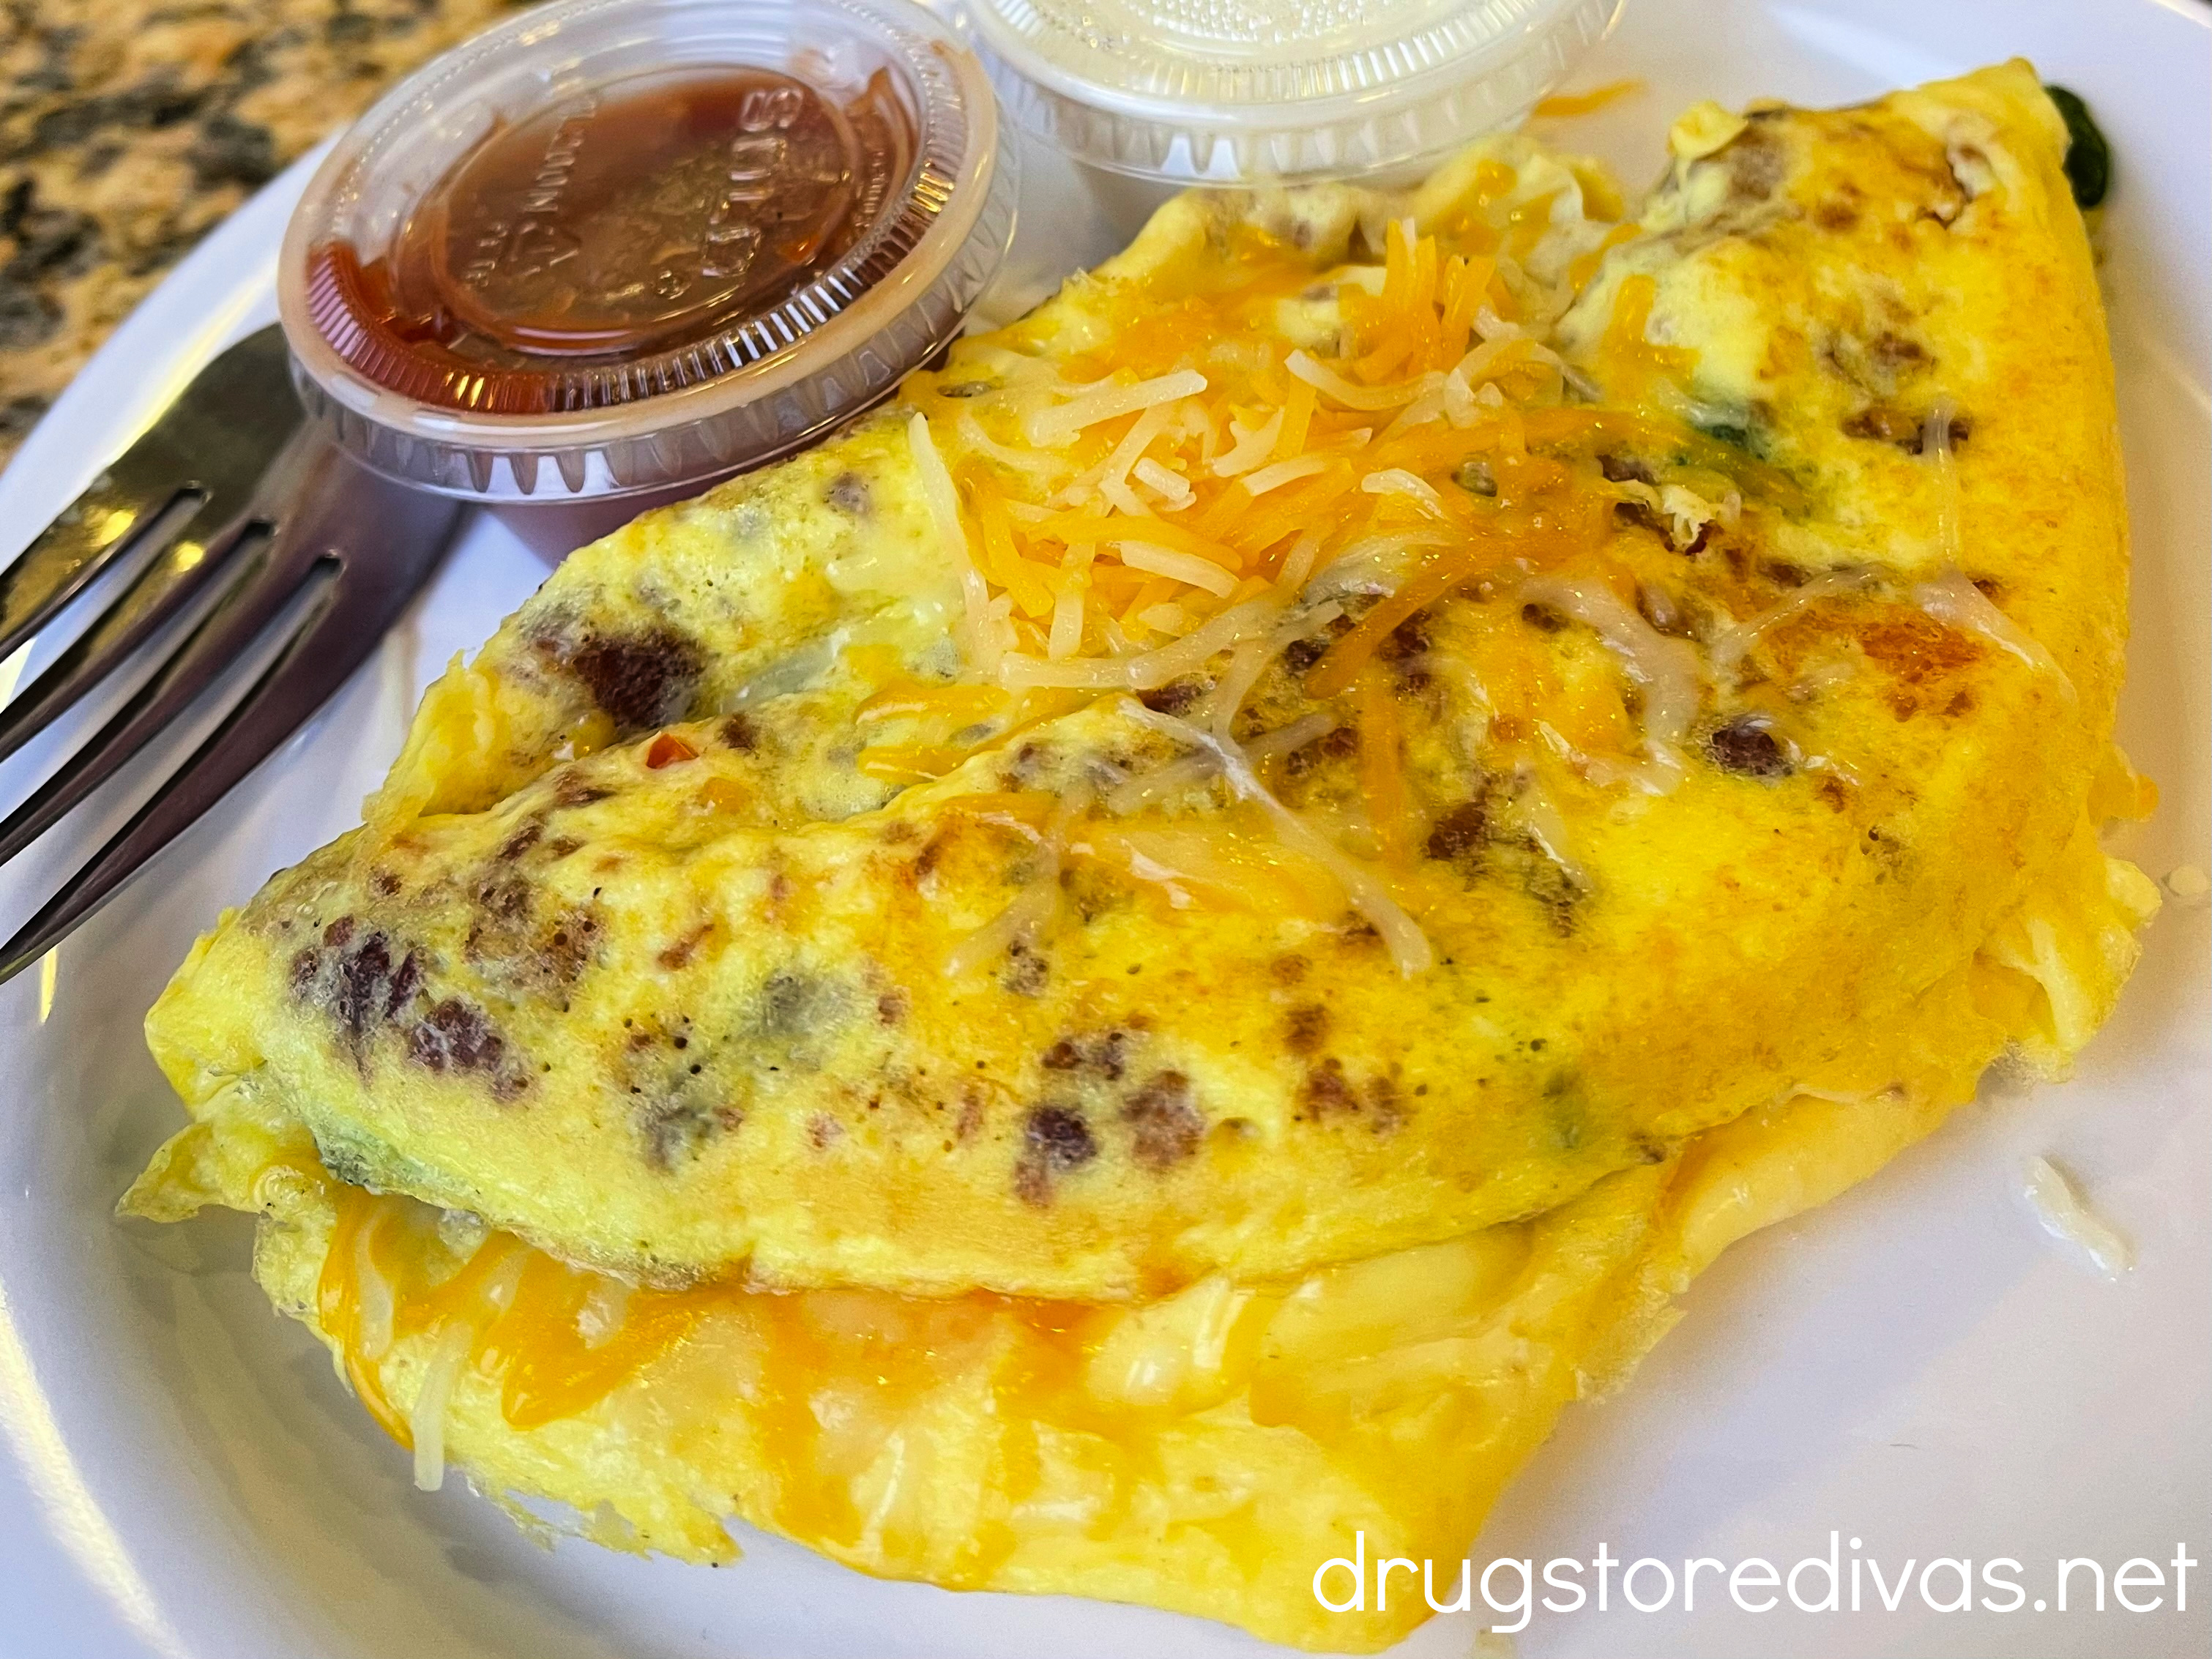 An omelet on a plate with fresh salsa and sour cream.